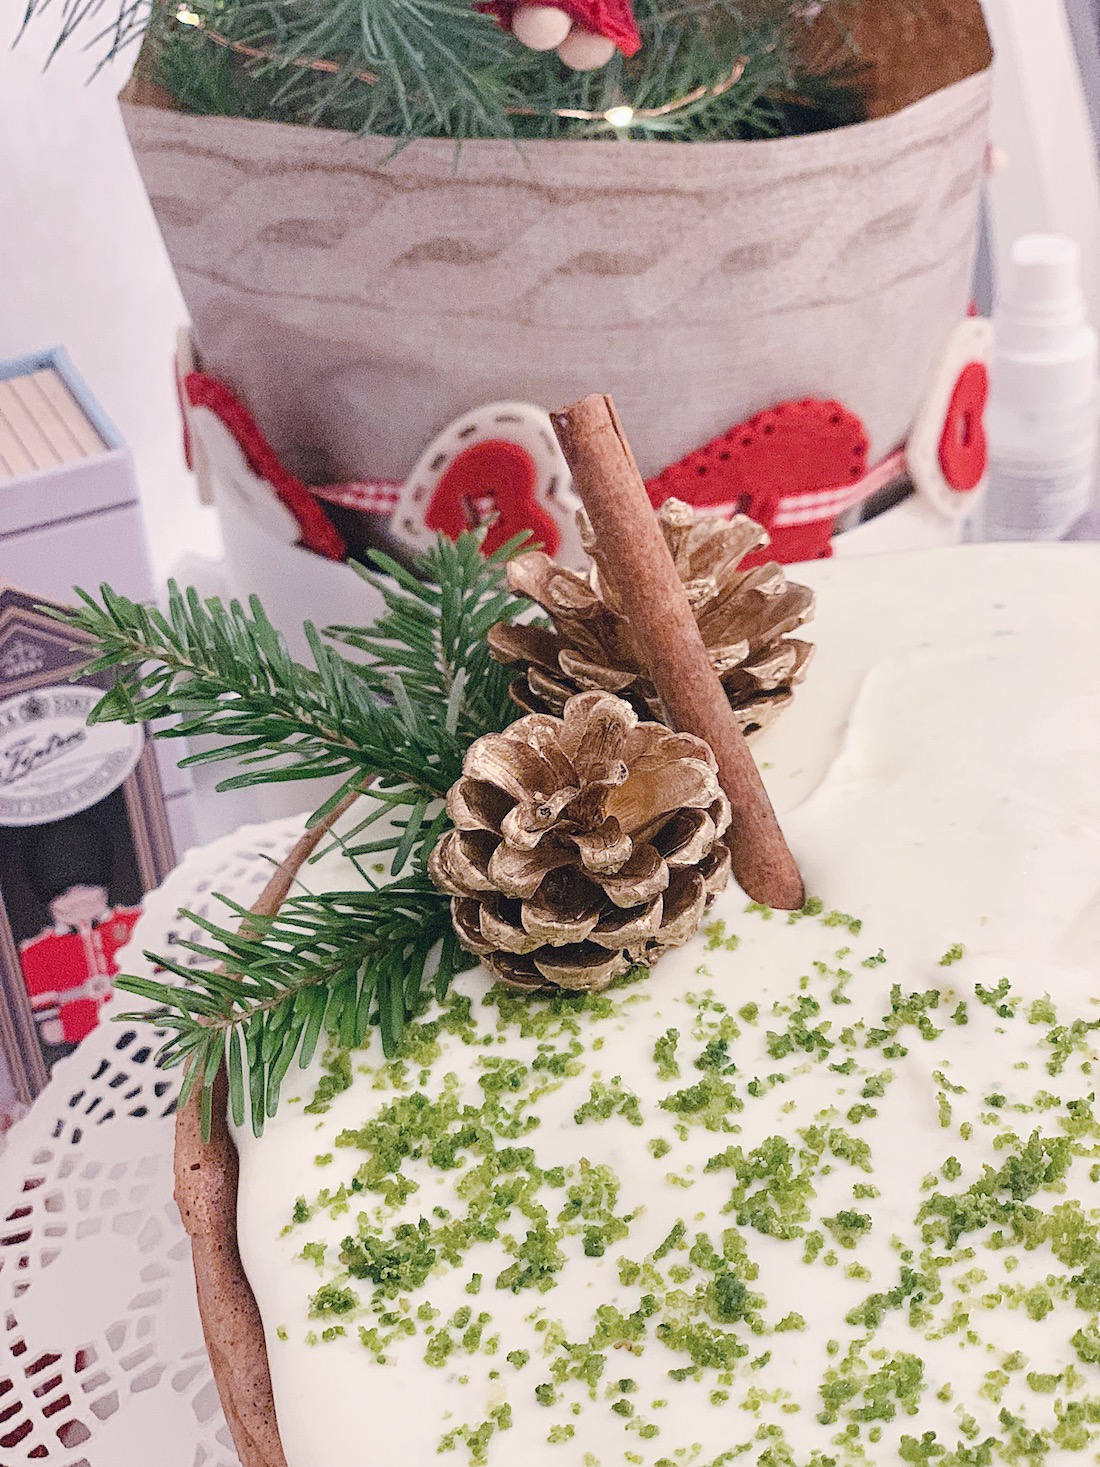 @projectfairytale: Lime Cream Cake for the Holiday Parties